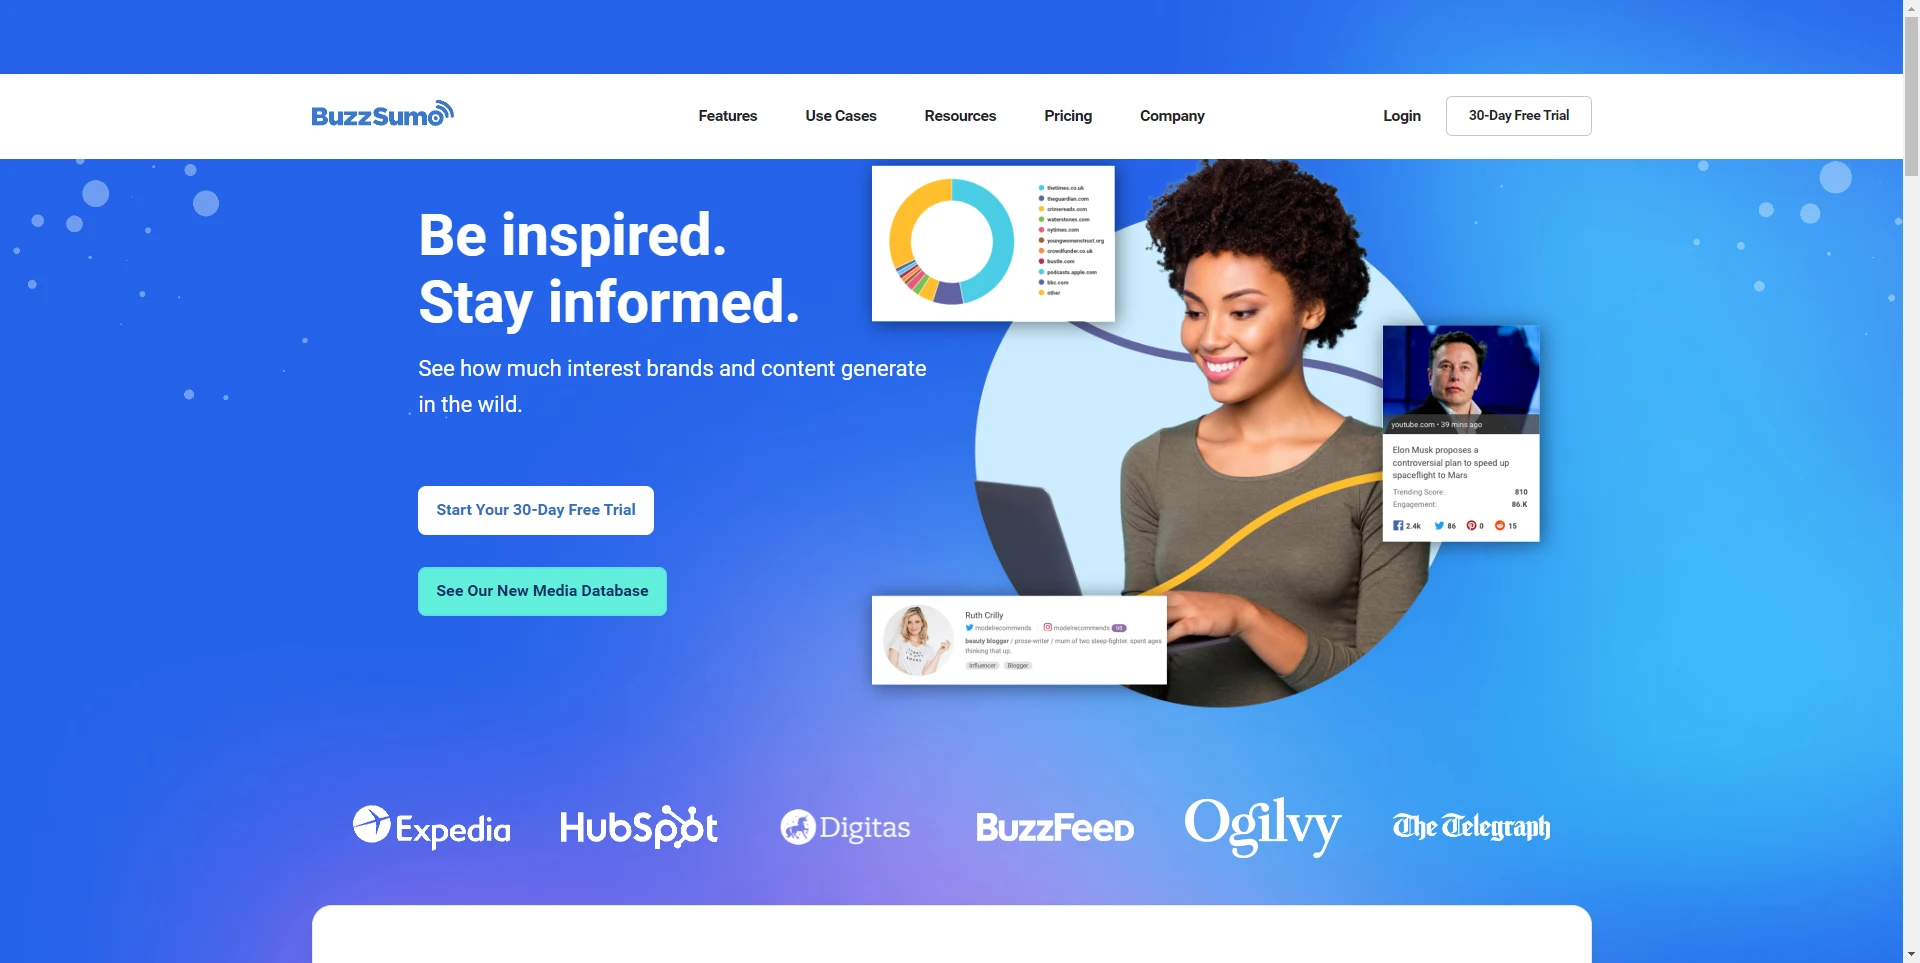 BuzzSumo's landing page to show how they can help get interest in brands and content mentions